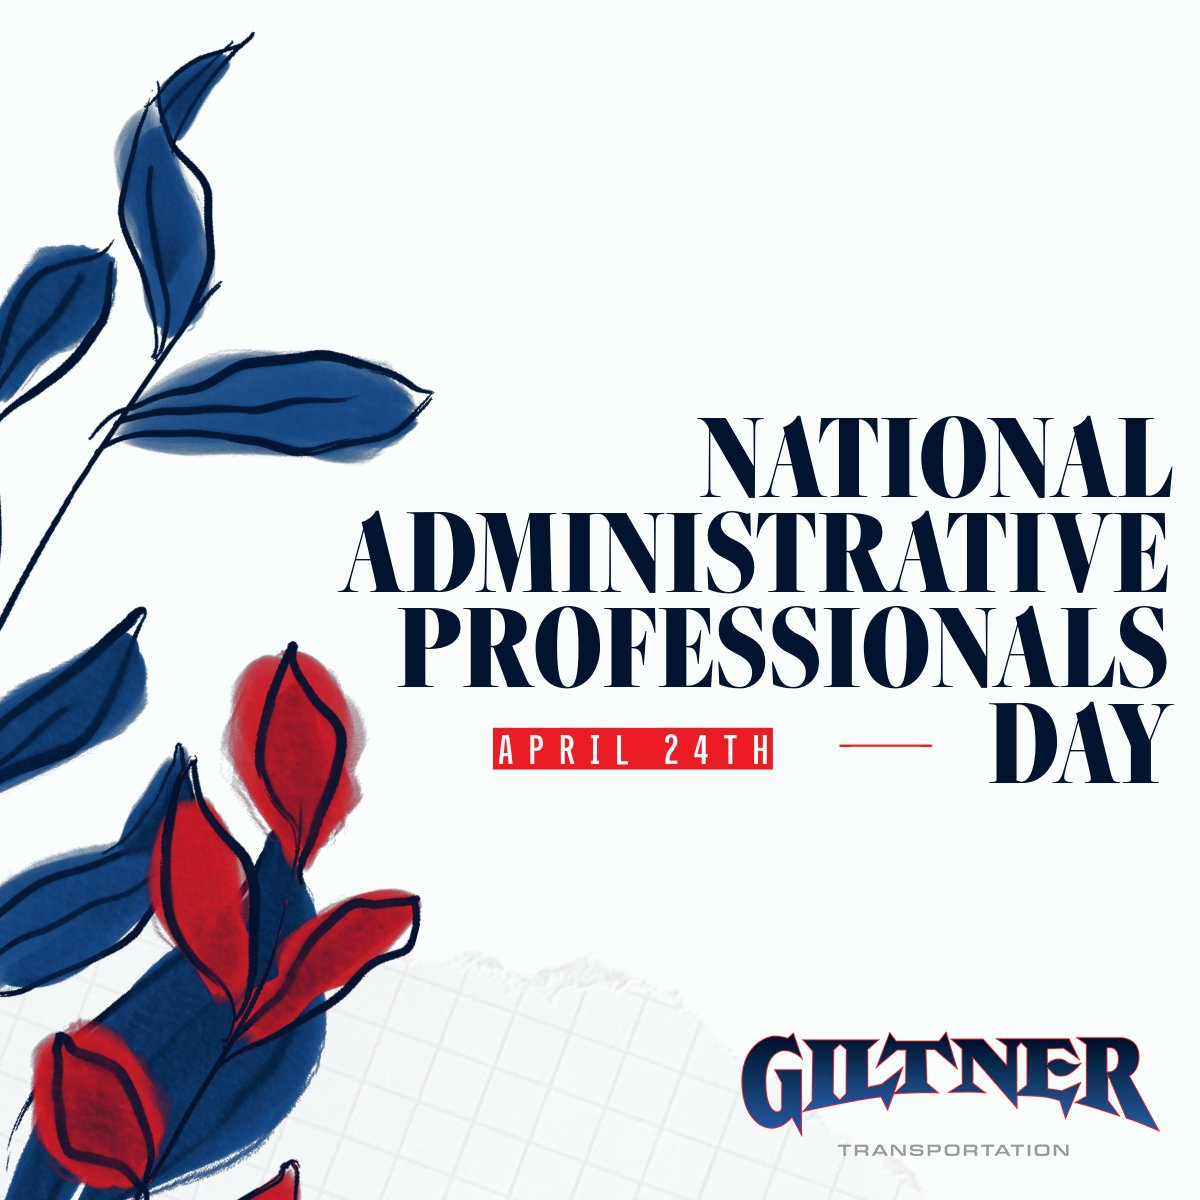 Shoutout to the driving force behind our success! 🚚 Happy #AdministrativeProfessionalsDay to the team that keeps our trucks on track, paperwork in order, and operations running smoothly. Your dedication keeps us moving forward! #TruckingHeroes #Giltner #TheBetterMove